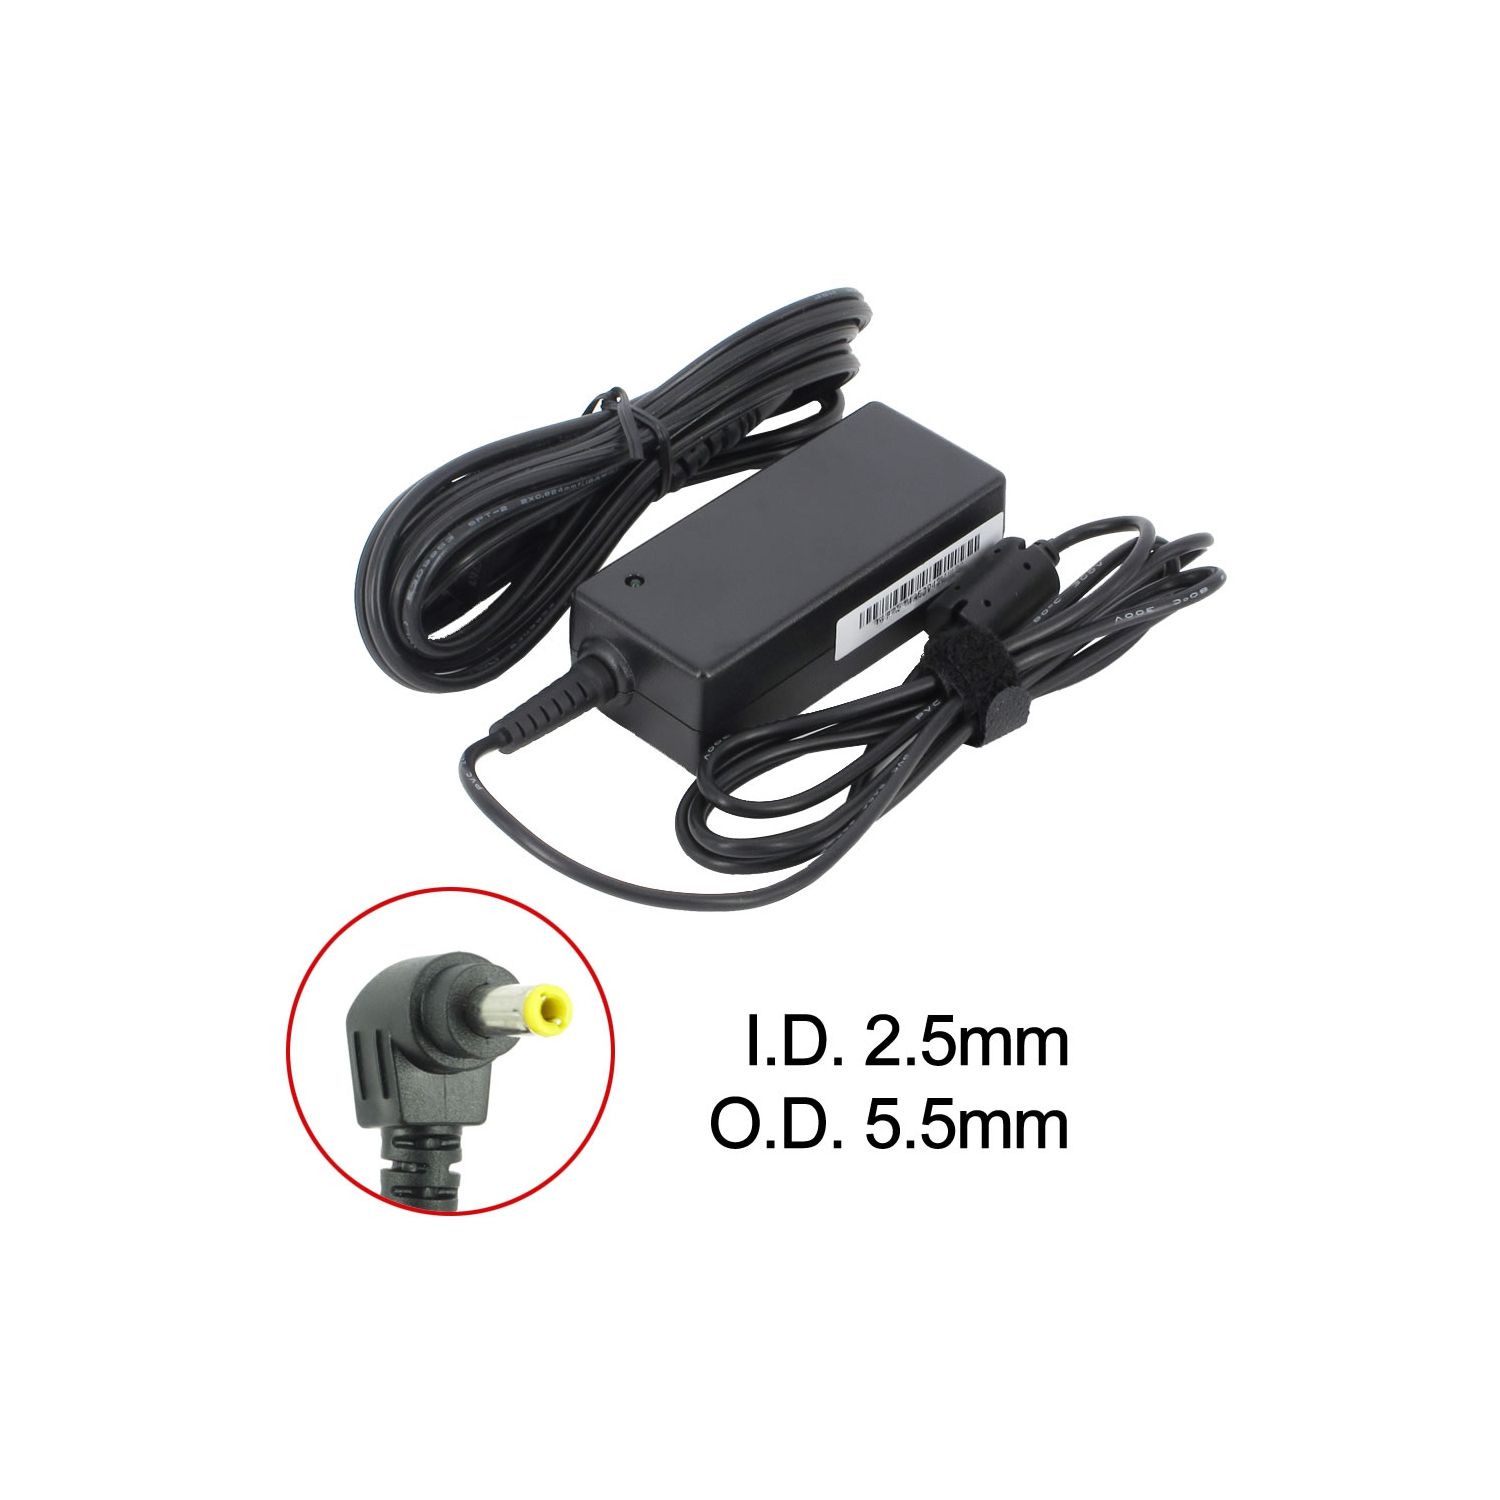 BattDepot: New Laptop AC Adapter for Lenovo 31036044, 0225A2040, 31037975, 41R4445, 45K1746, 55Y9365, 57Y6365, LN-A0403A3C